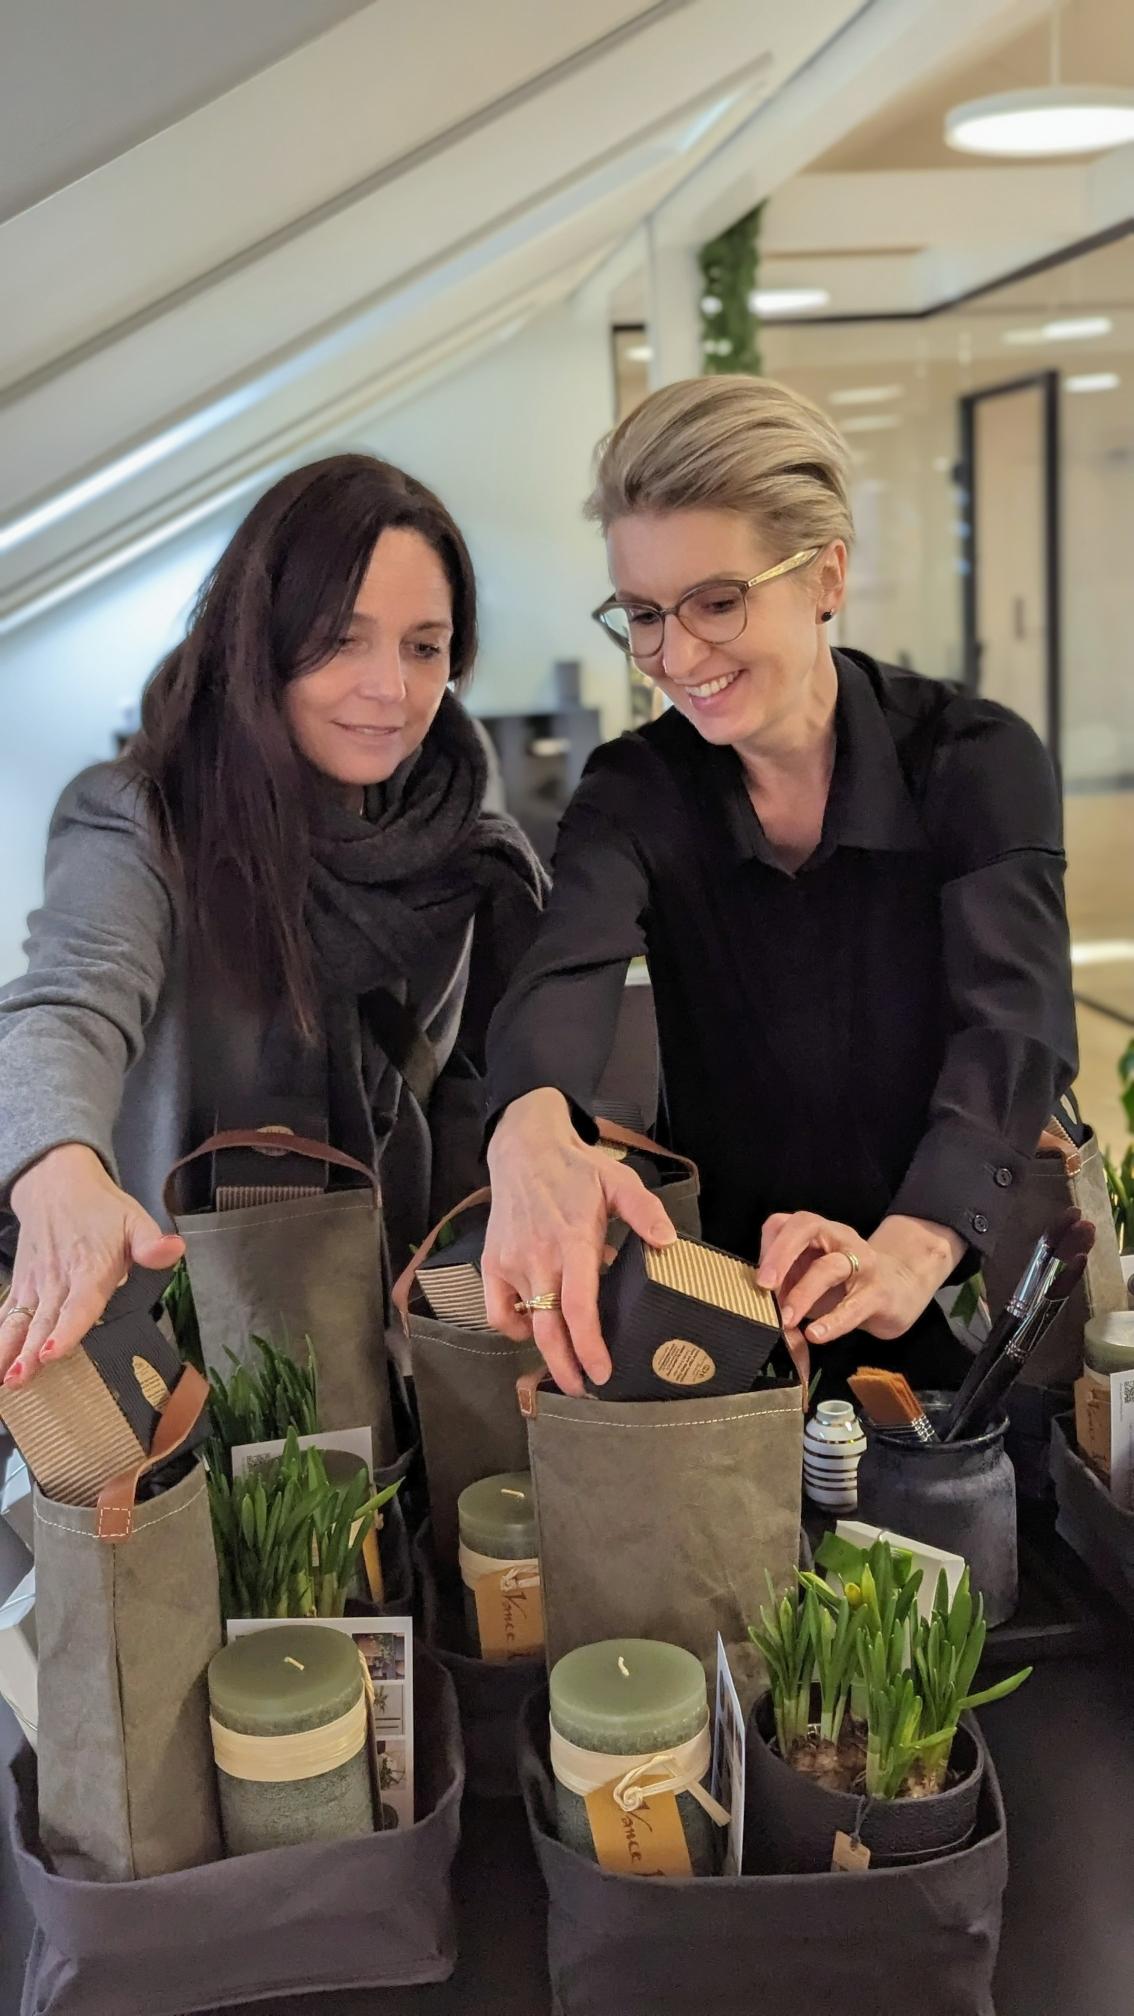 Agne and Susanne arrange sustainable gifts to the team